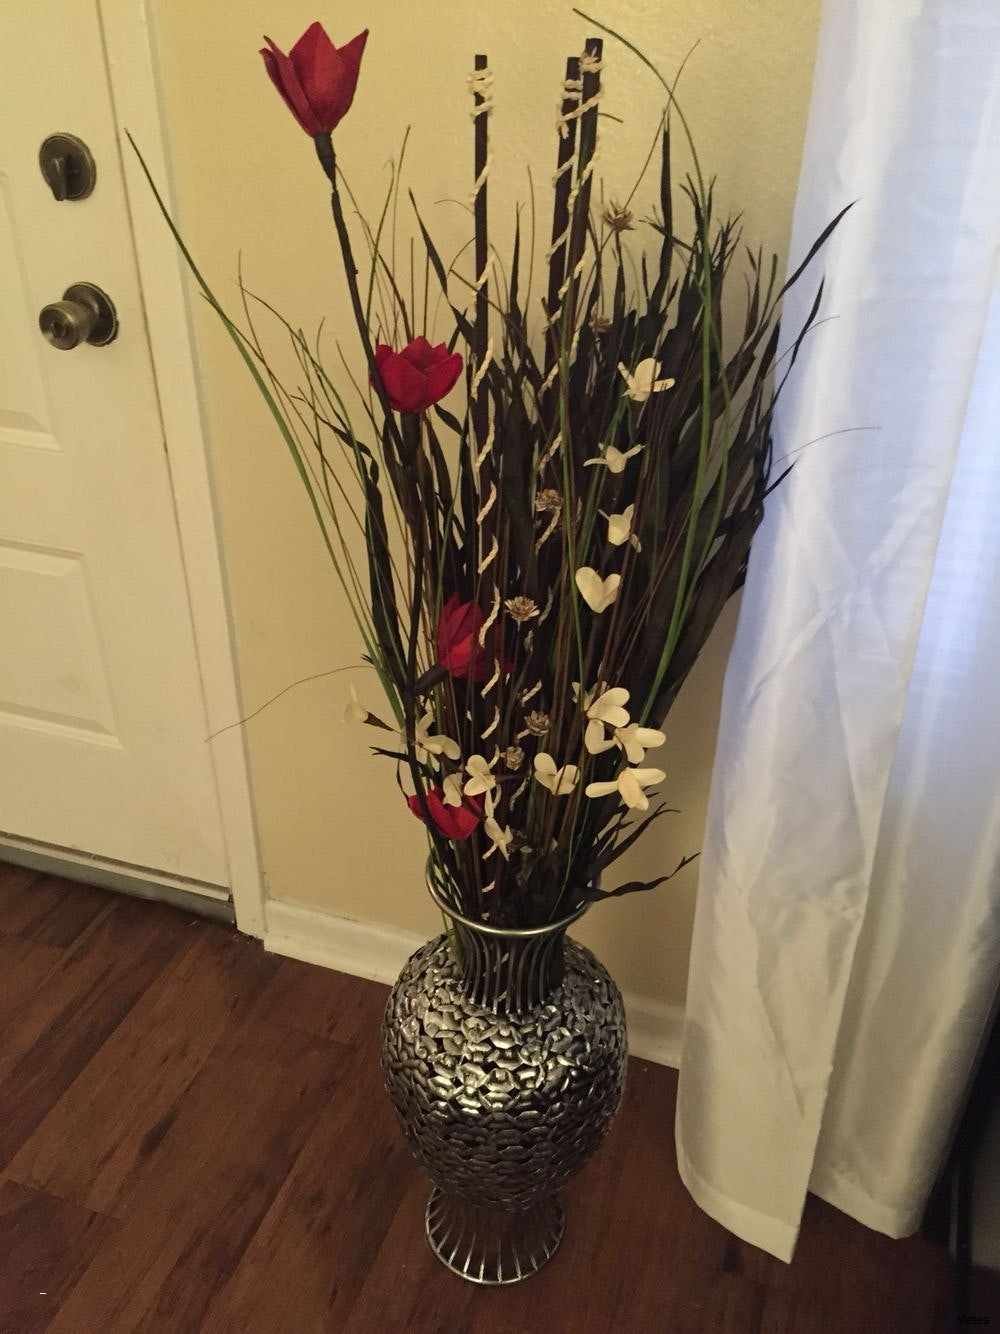 family dollar vases of stick lights new vases vase with sticks red in a i 0d 3d model and intended for stick lights new vases vase with sticks red in a i 0d 3d model and lights ice